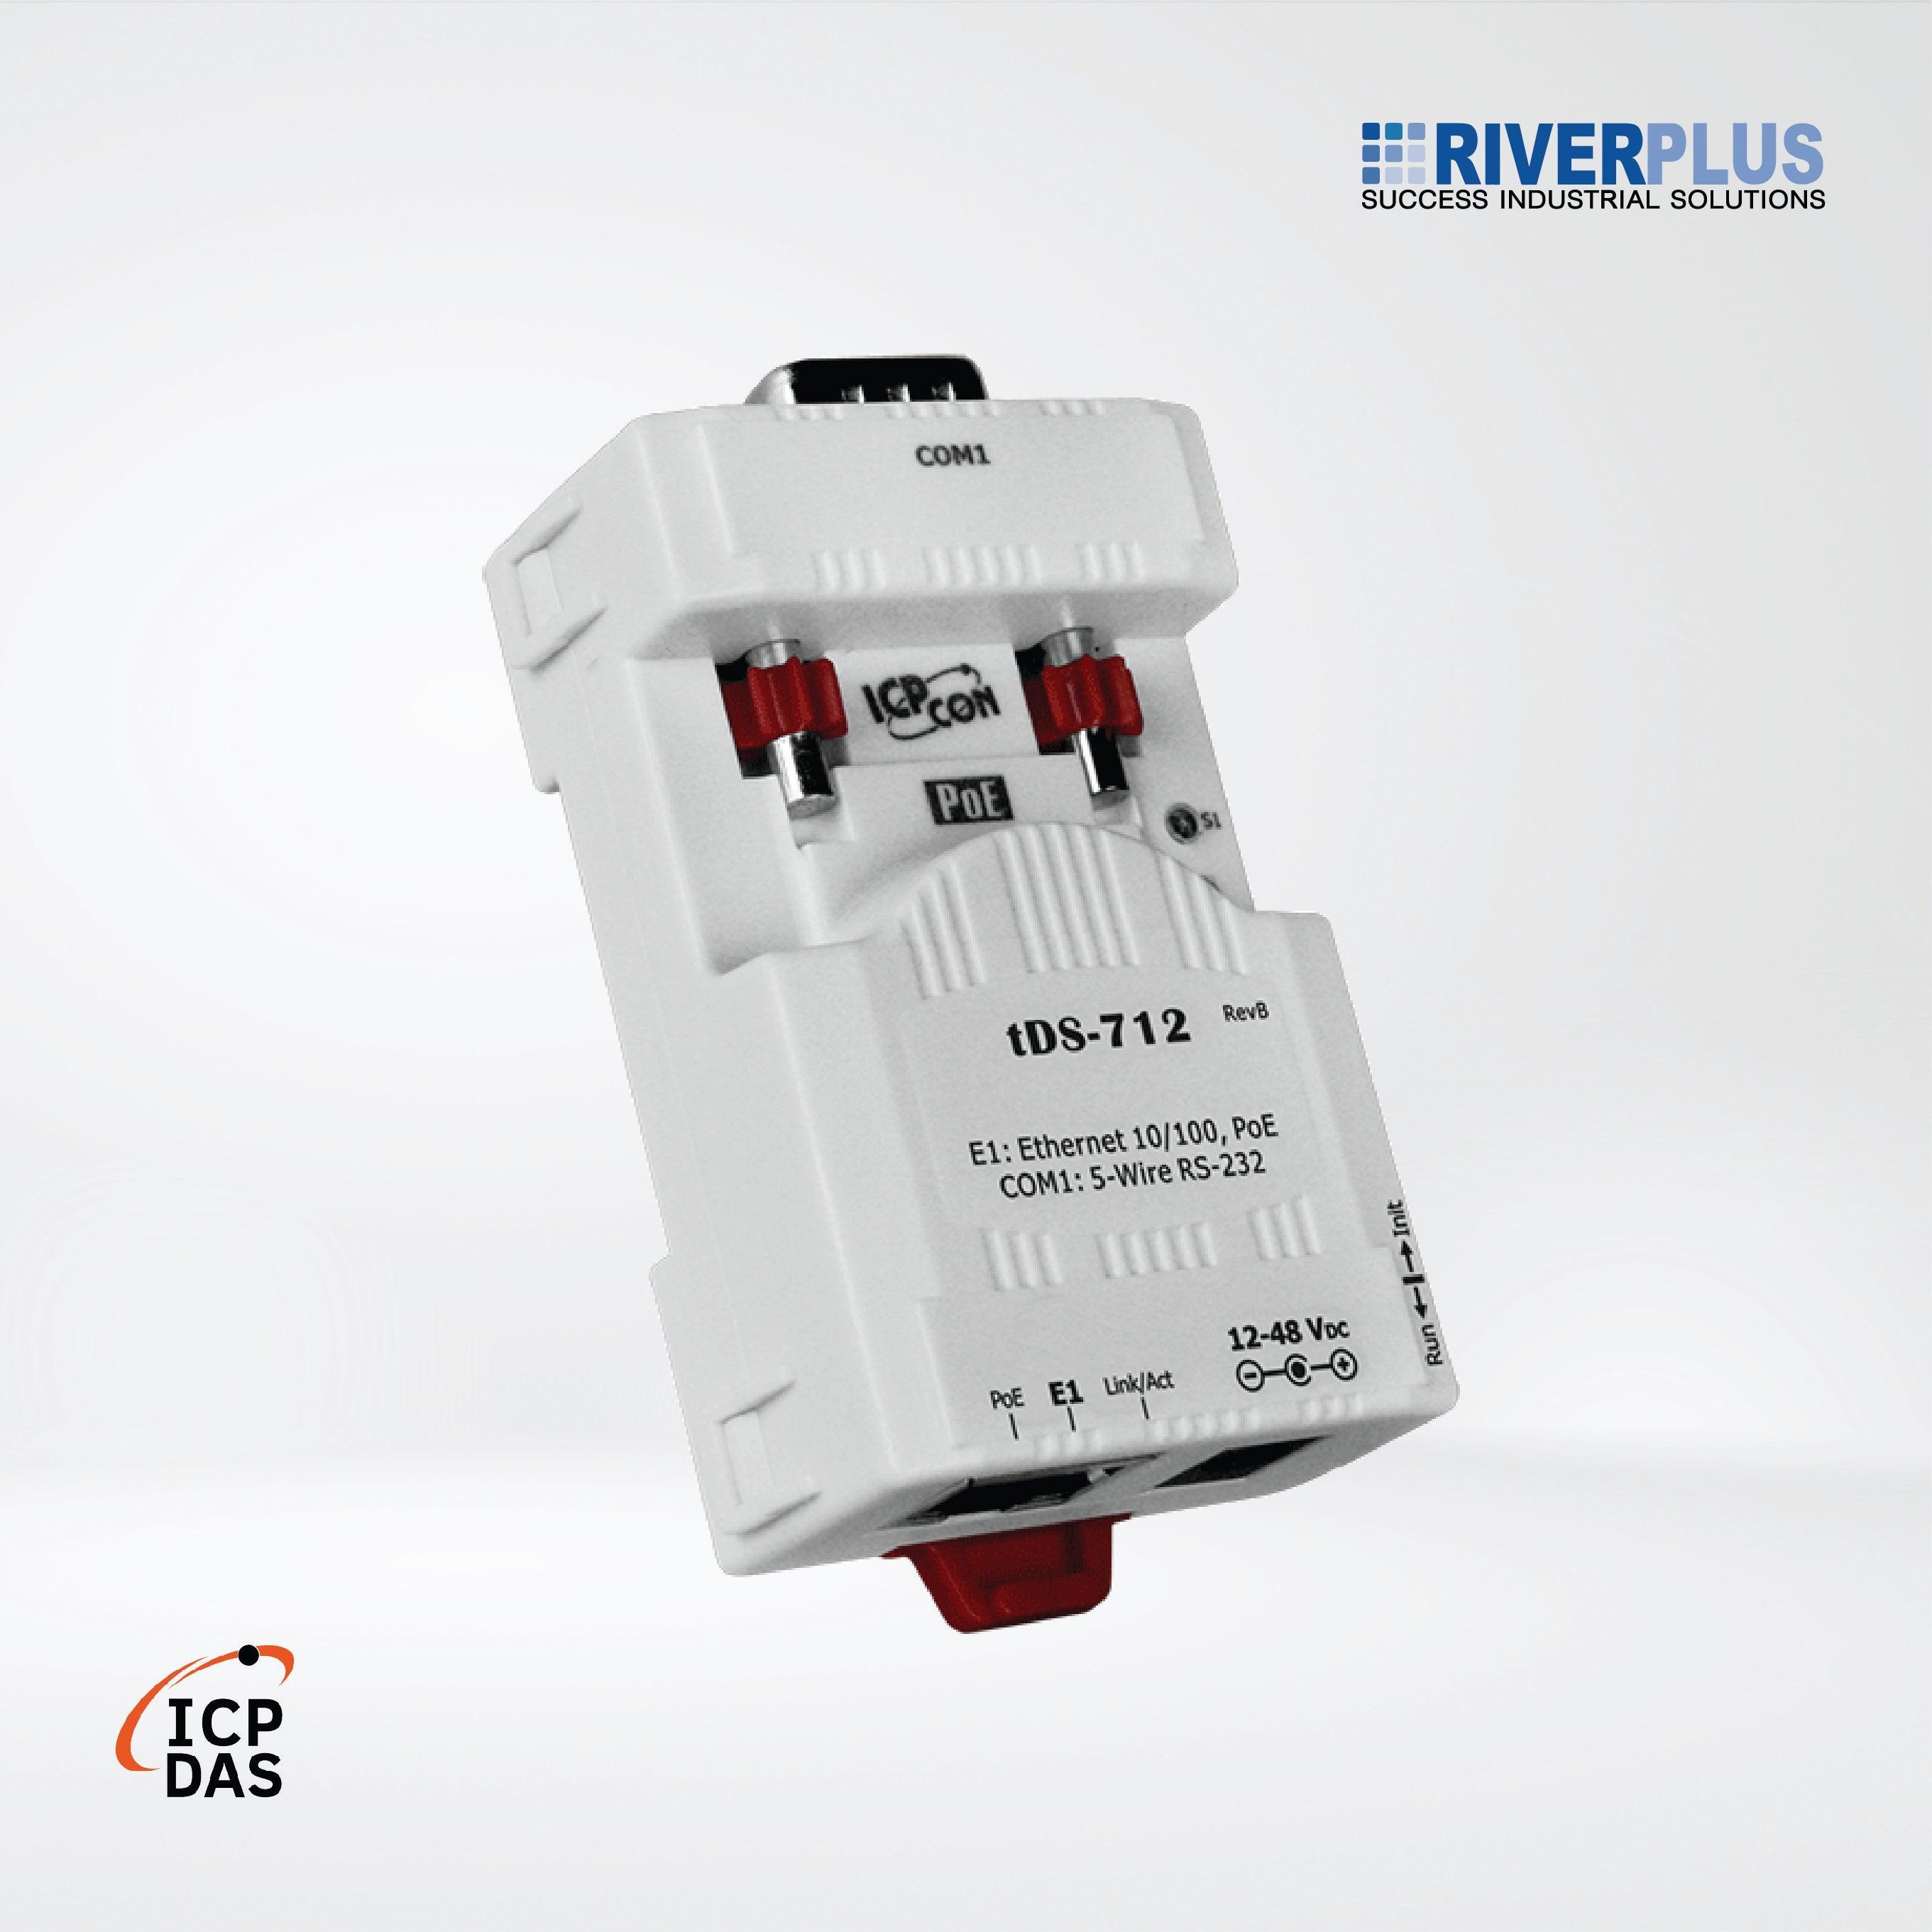 tDS-712 CR Tiny (1x RS-232, DB9 Male) Serial-to-Ethernet Device Server - Riverplus